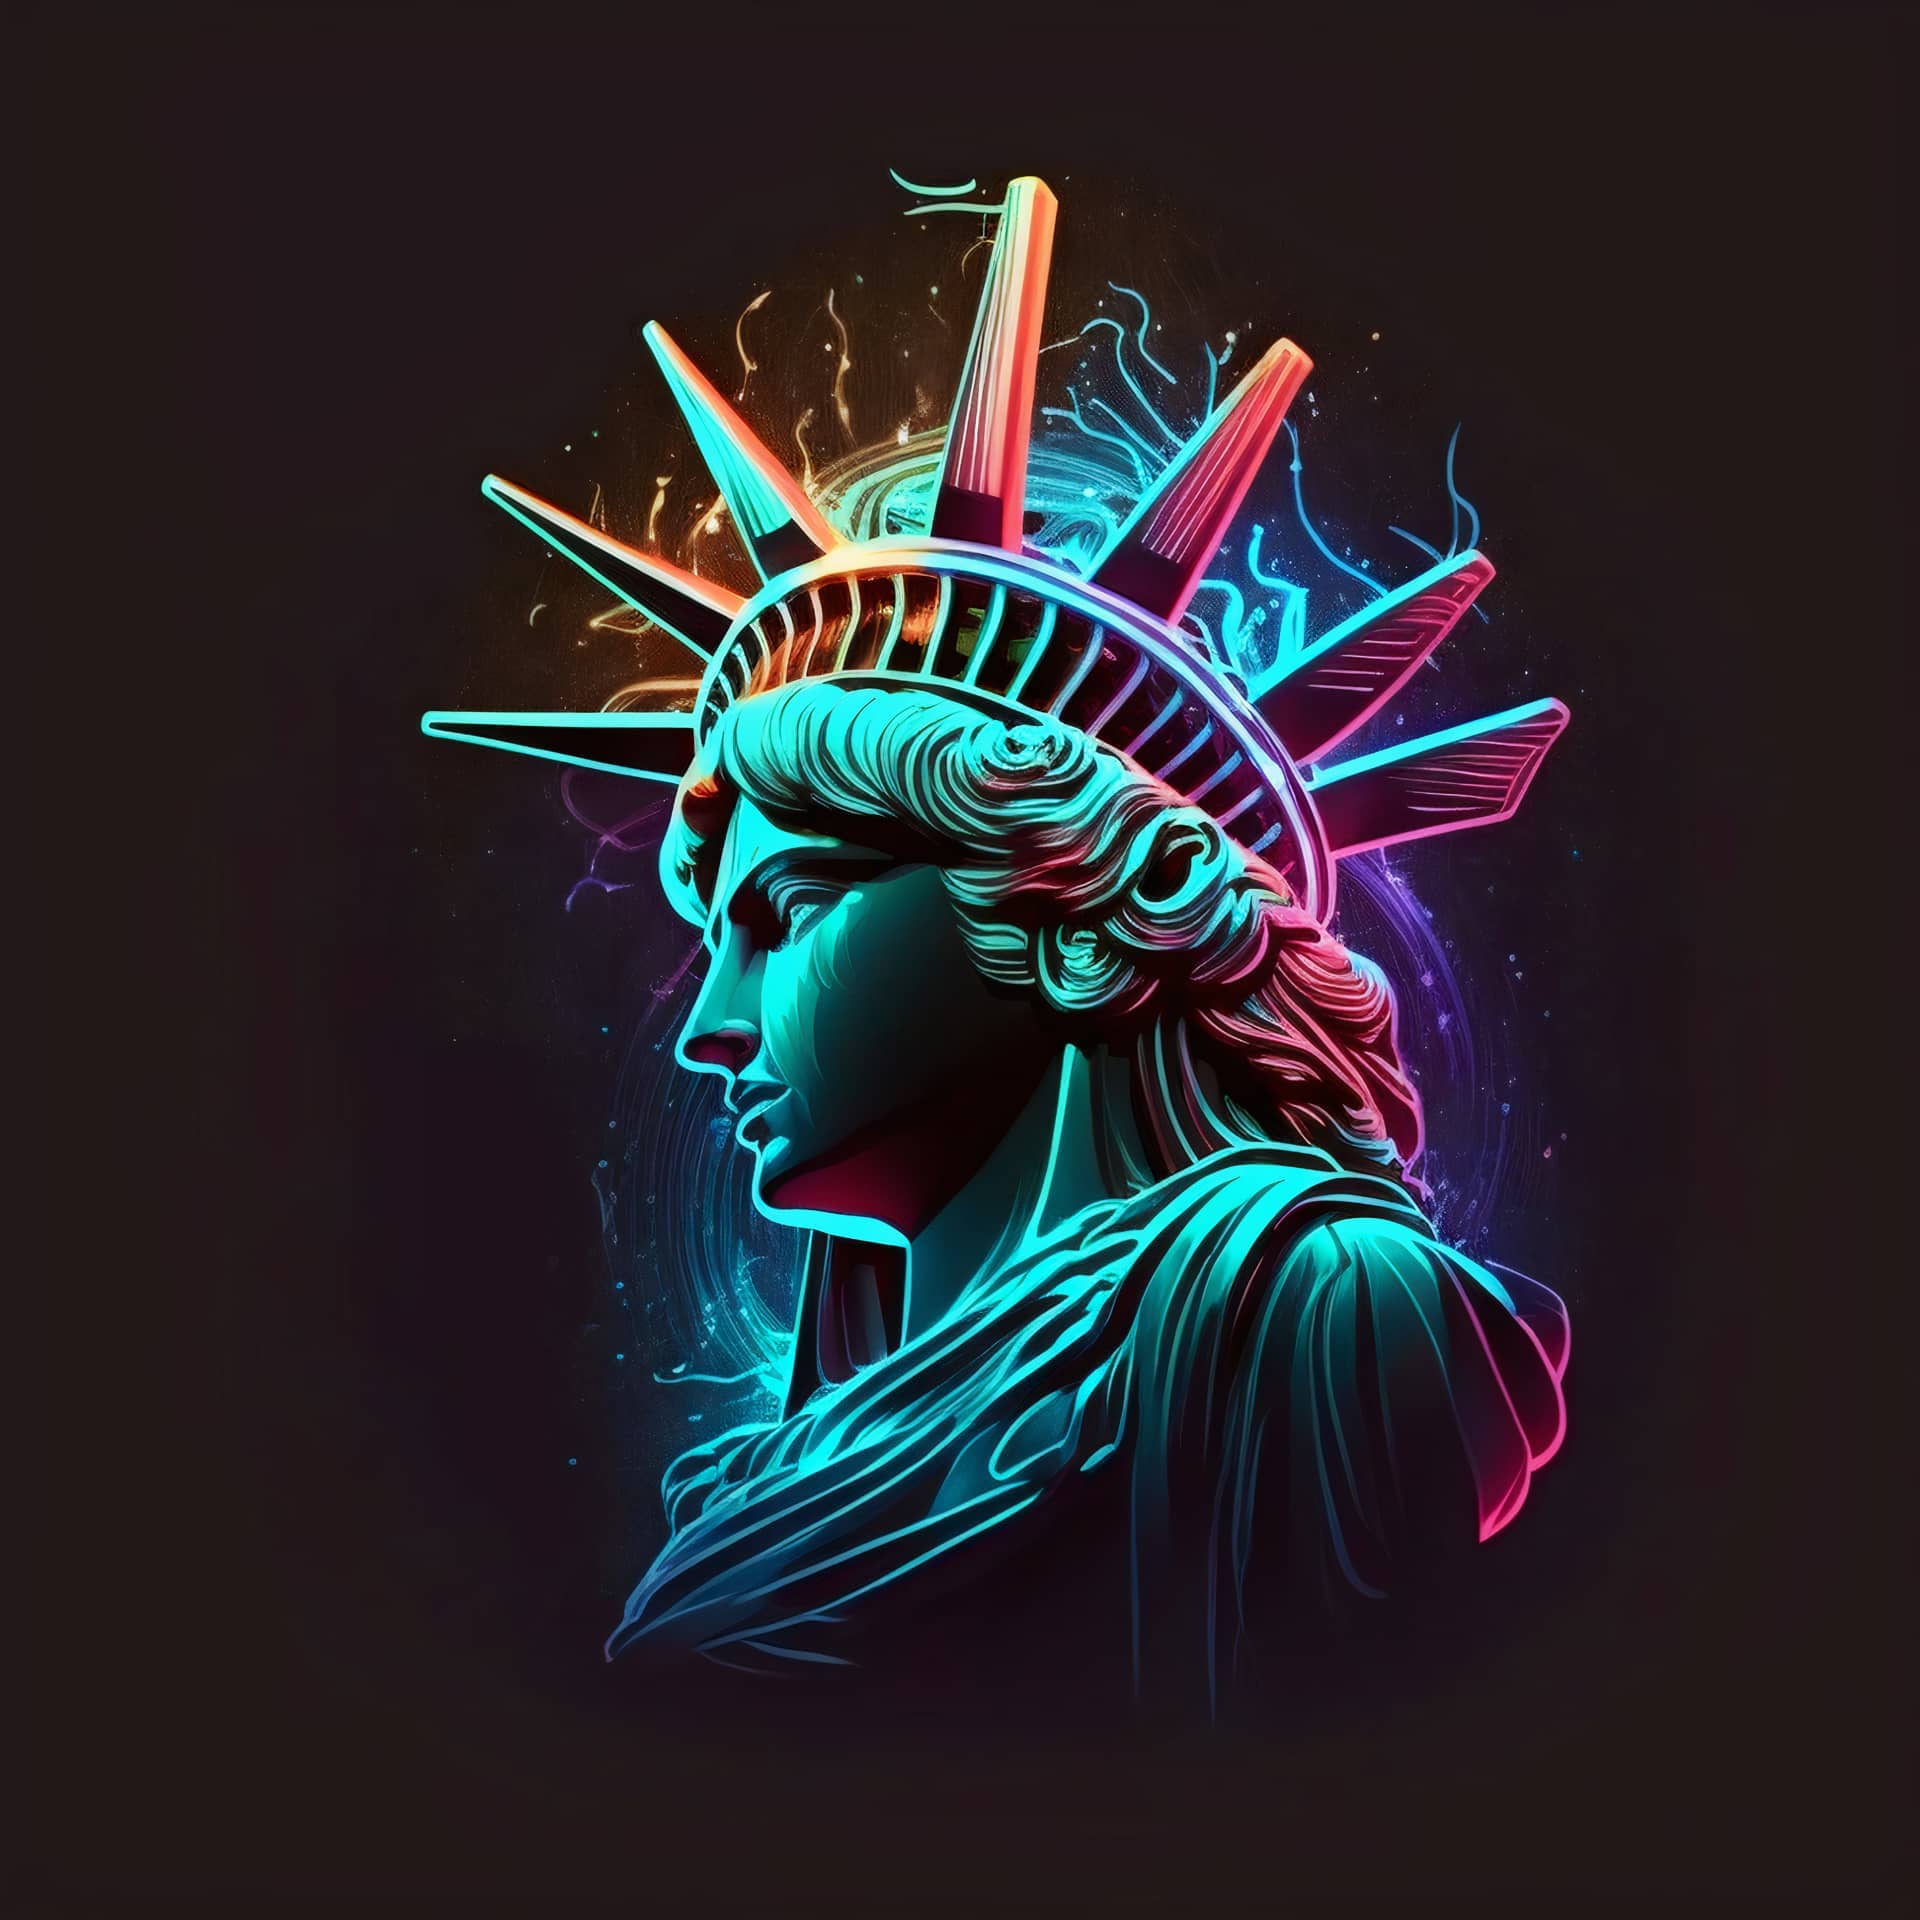 Facebook profile pic style statue liberty illustration new york picture